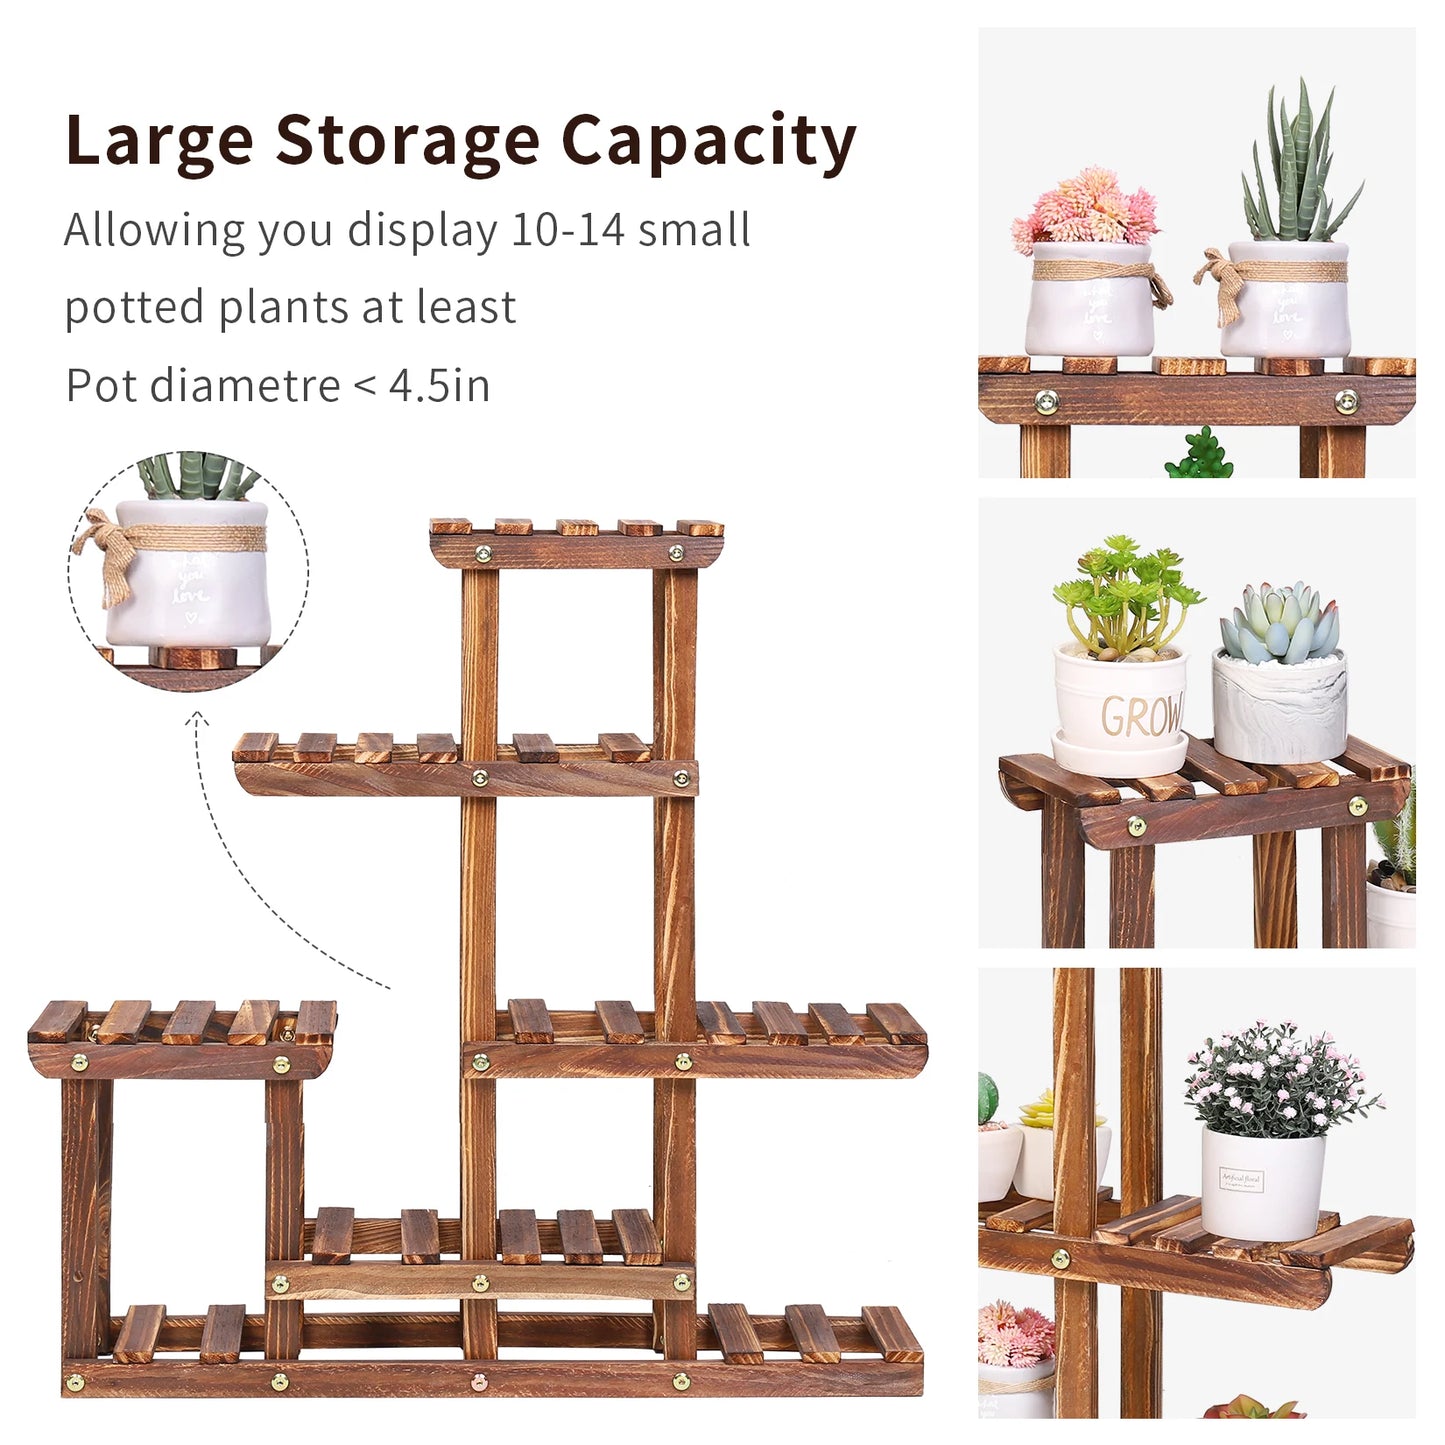 Multi-tiered rack designed Plant stand Julian - Wood Plant Stands - KonnaLiving